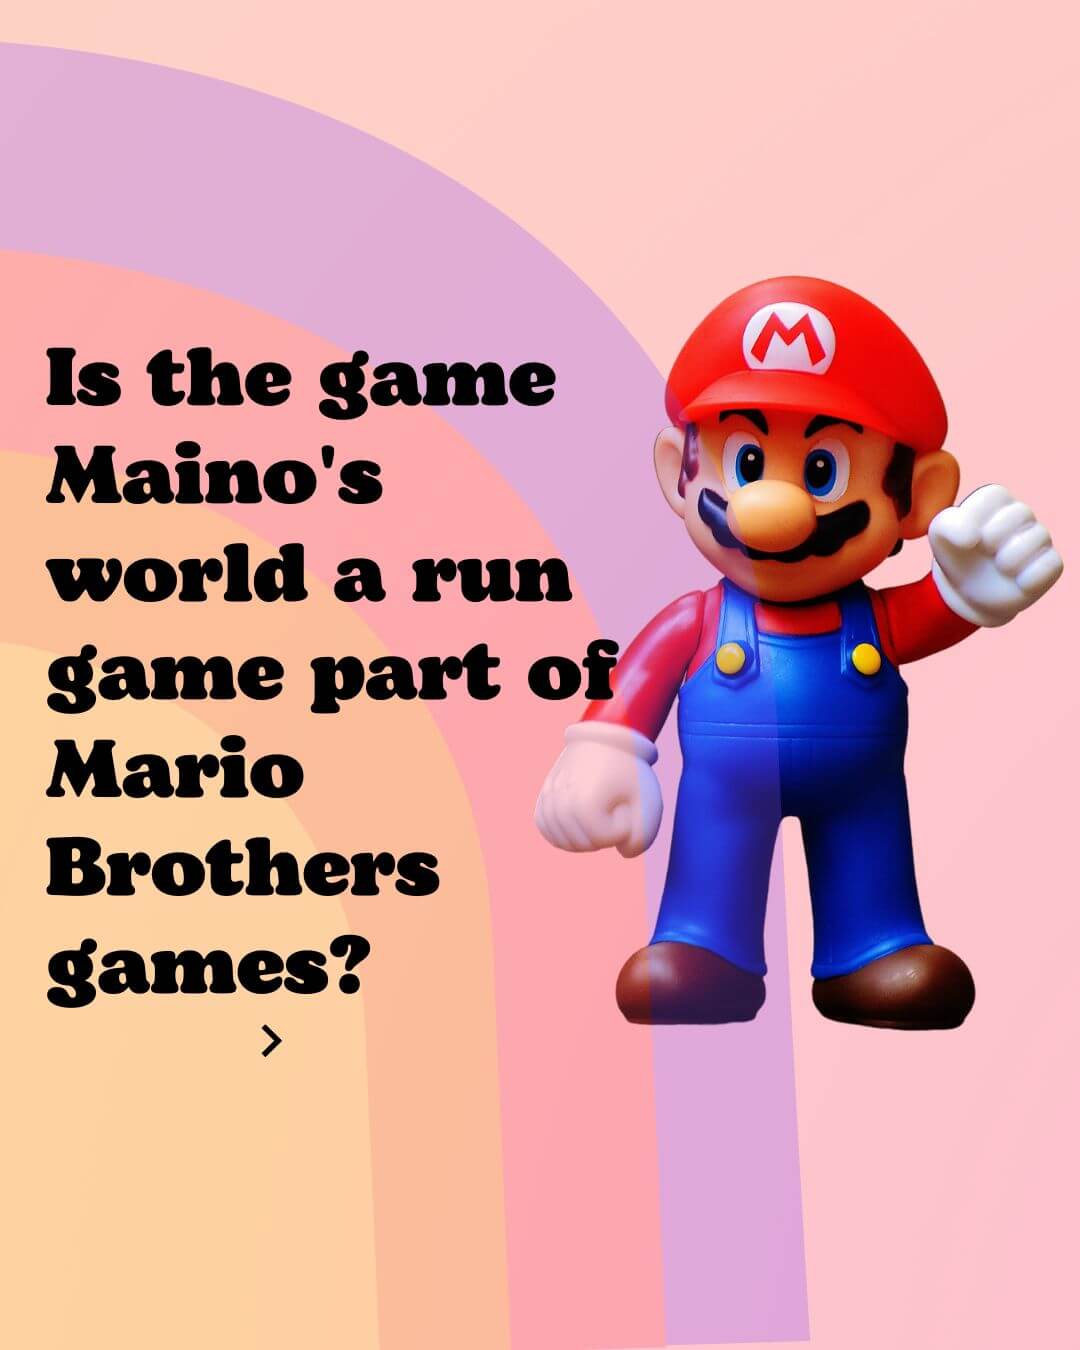 Is the game Maino's world a run game part of Mario Brothers games